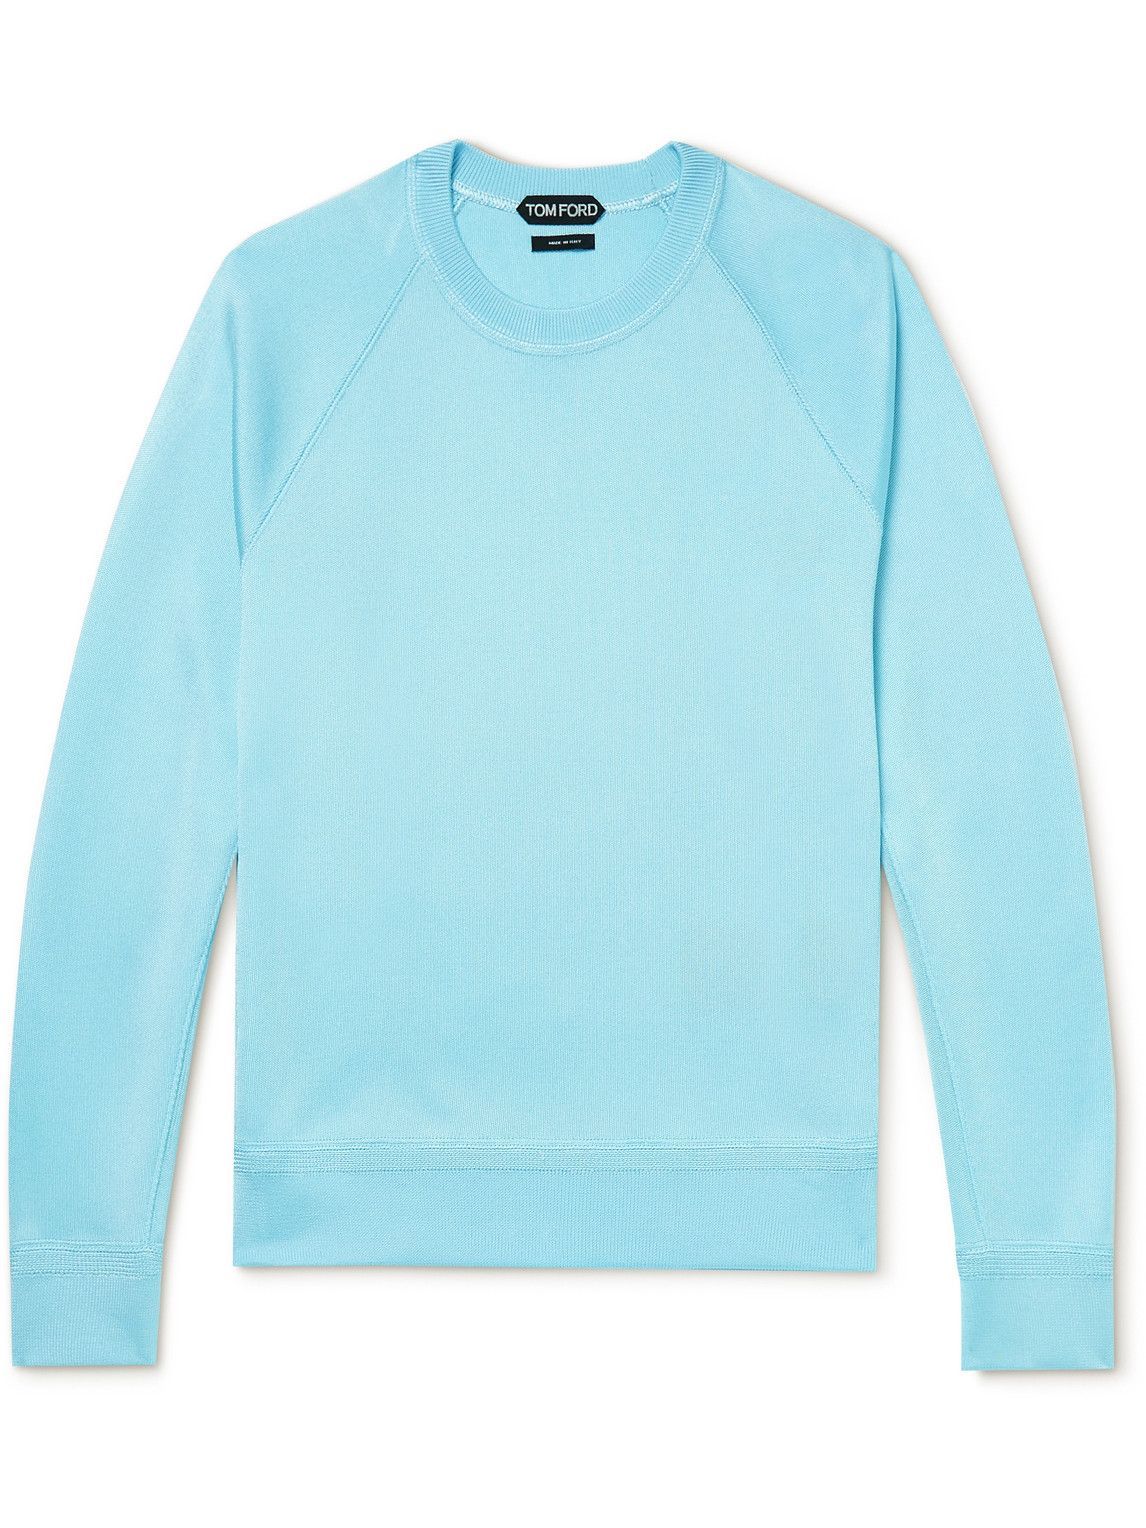 TOM FORD - Slim-Fit Knitted Sweater - Blue TOM FORD